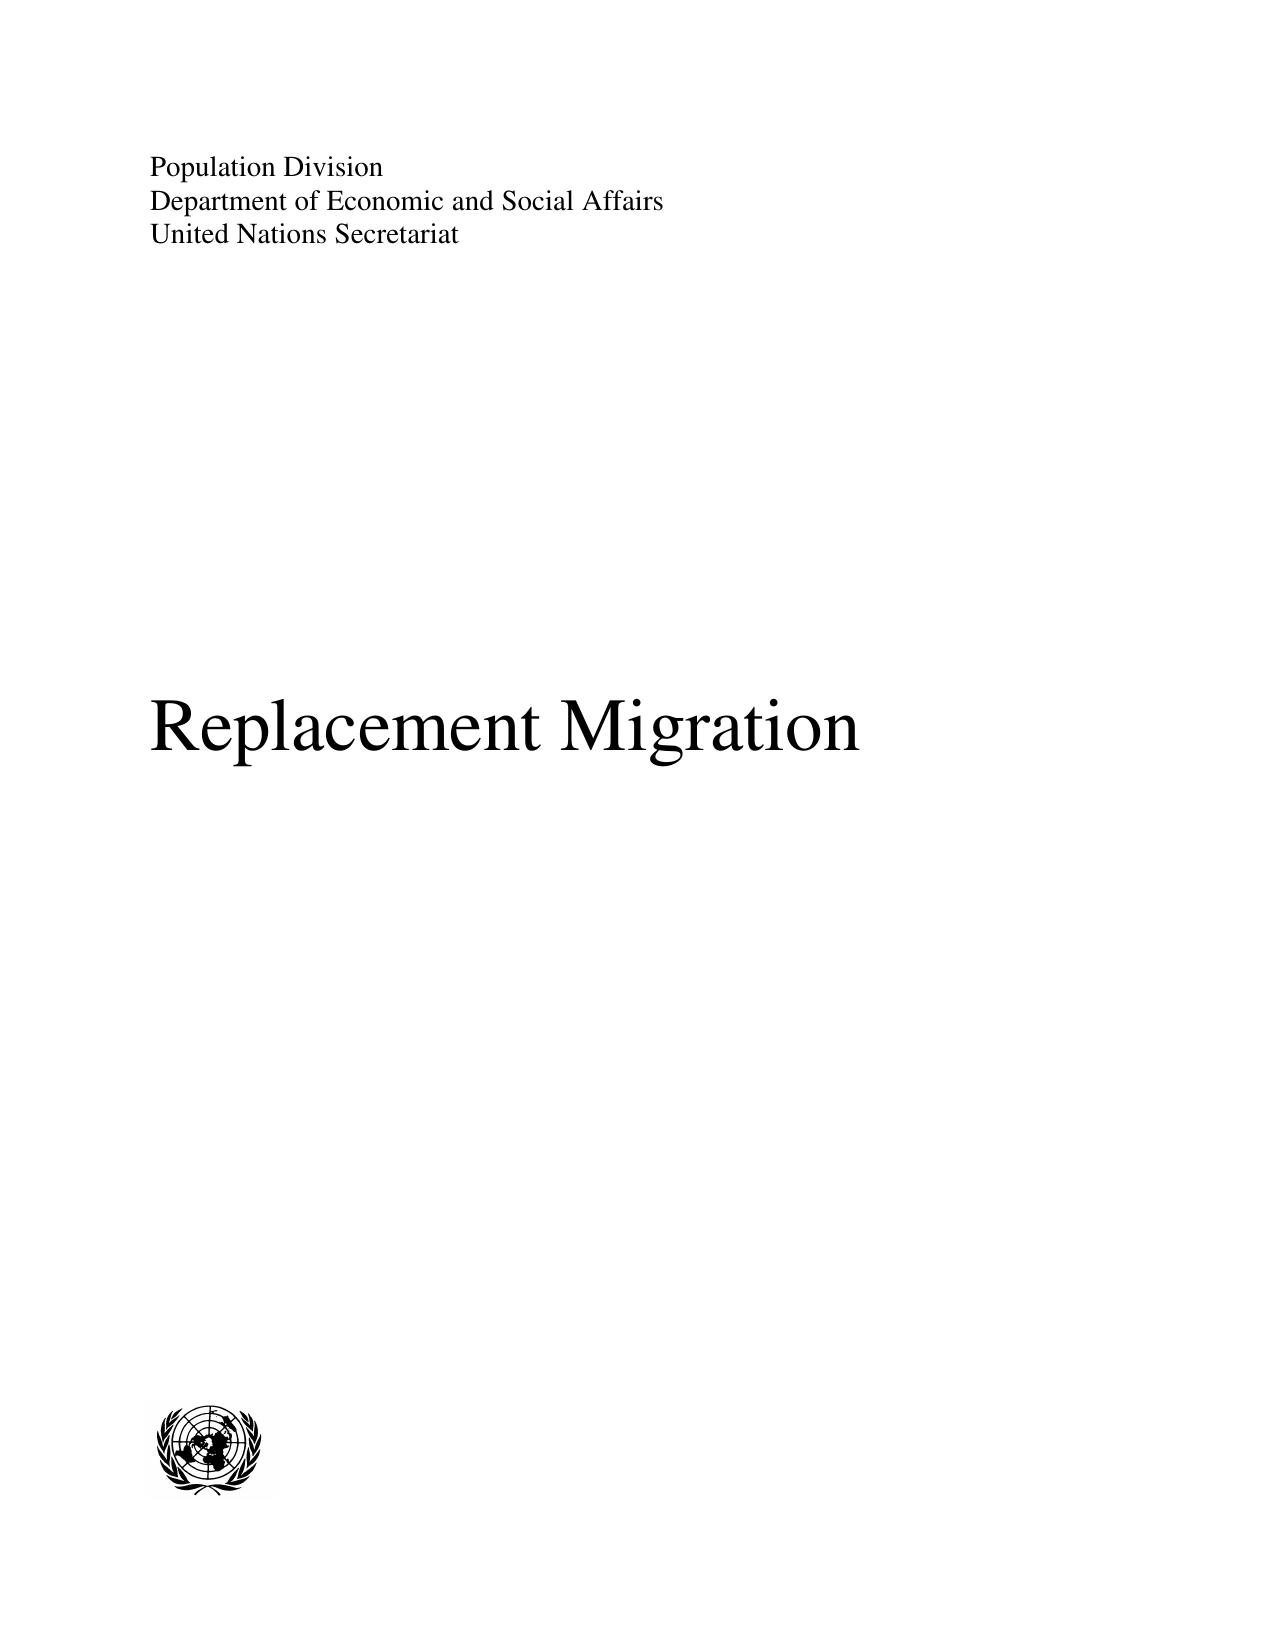 Replacement Migration: Is It a Solution to Declining and Ageing Populations